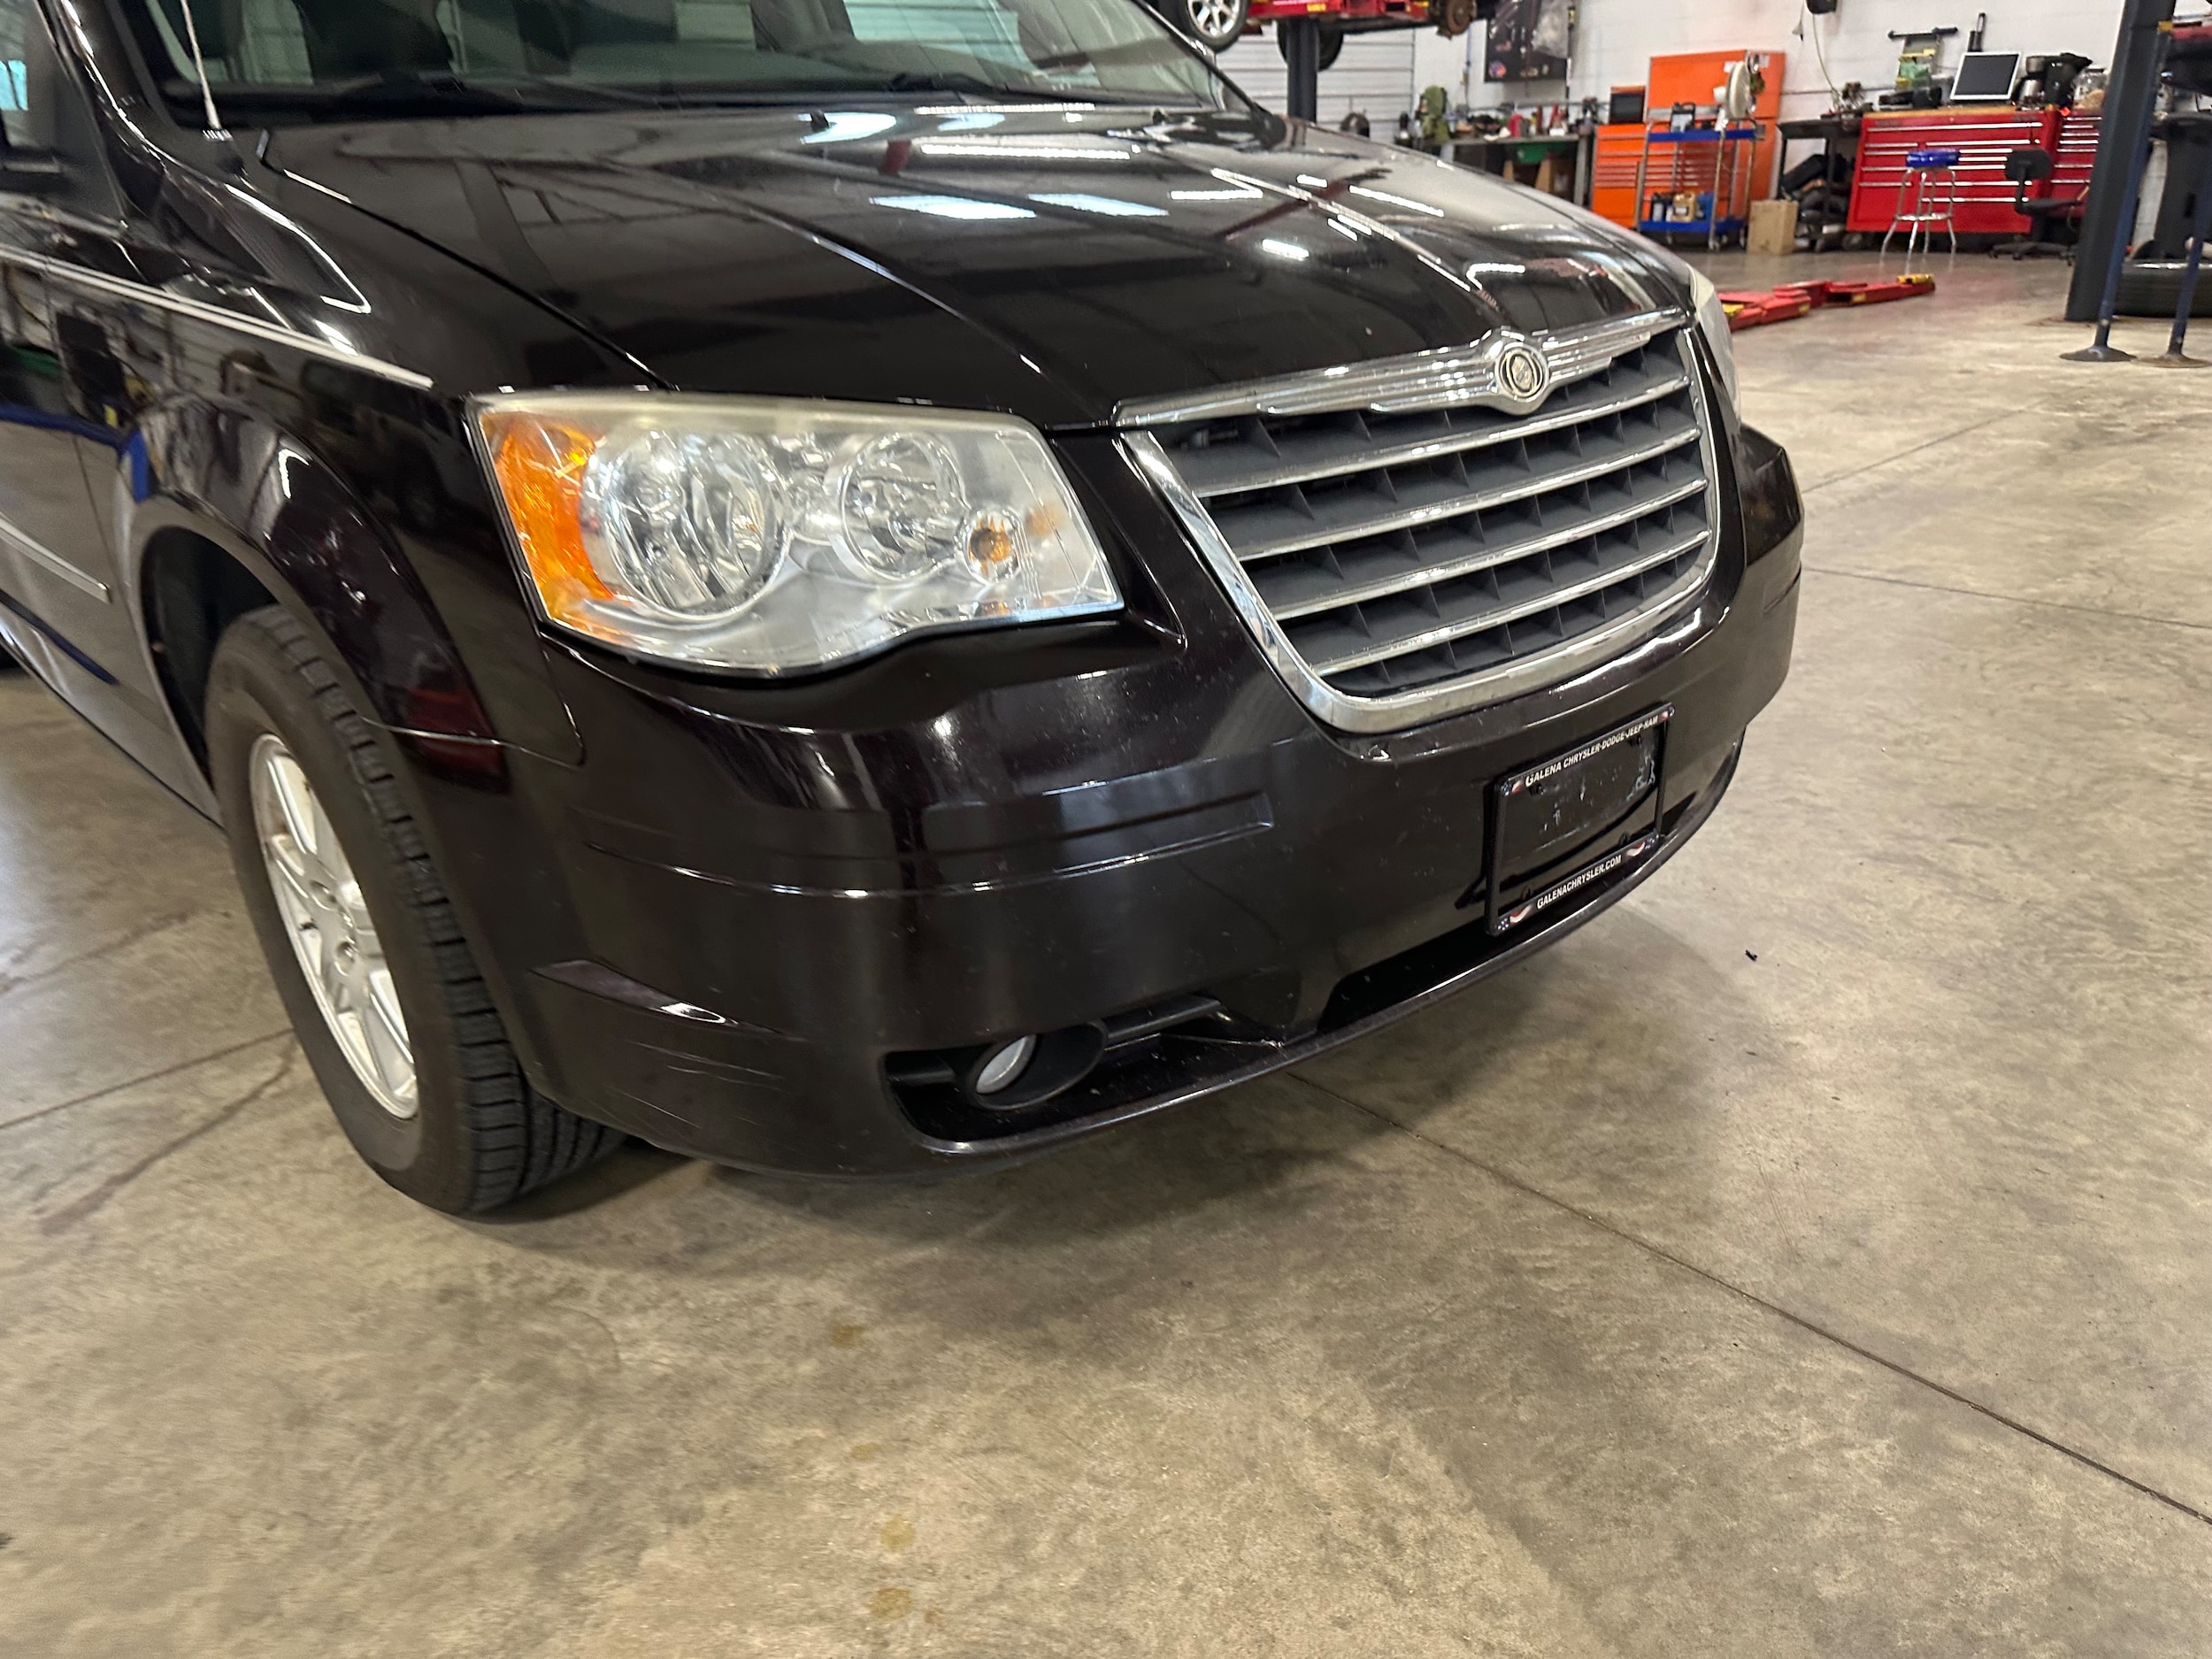 Used 2010 Chrysler Town & Country Touring with VIN 2A4RR5D19AR254109 for sale in Galena, IL